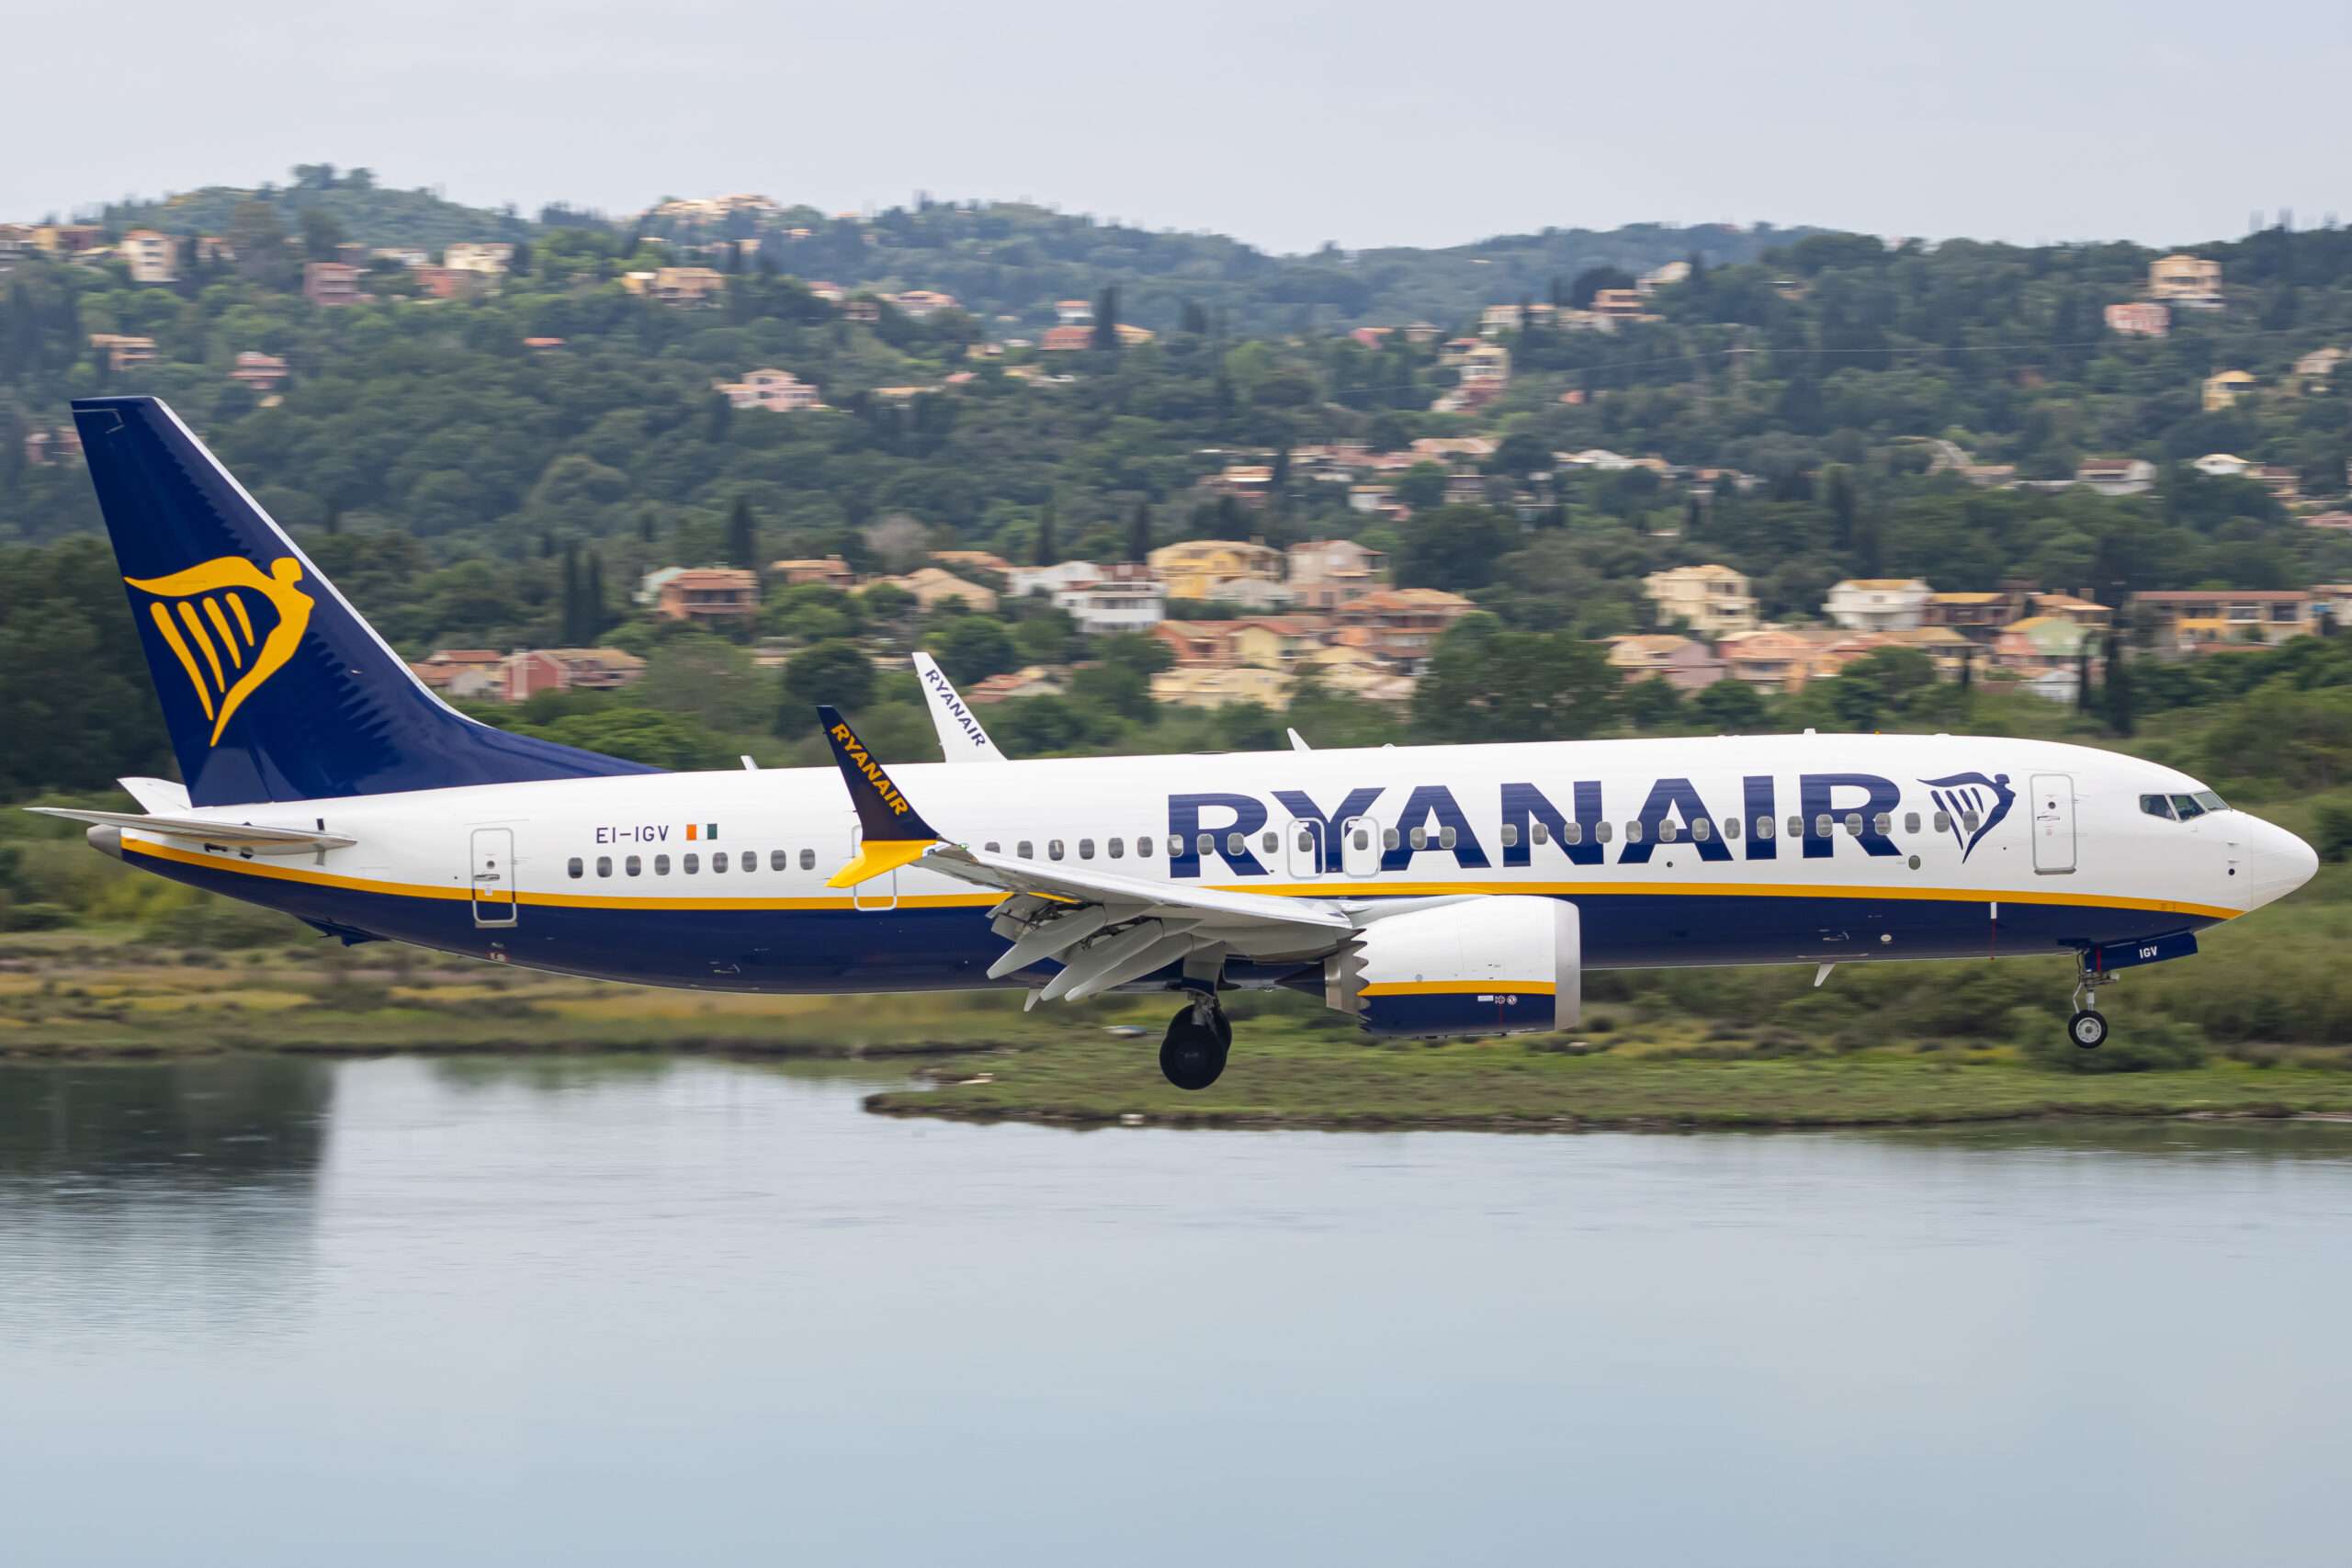 Ryanair Will Launch Legal Action Against NATS: O'Leary